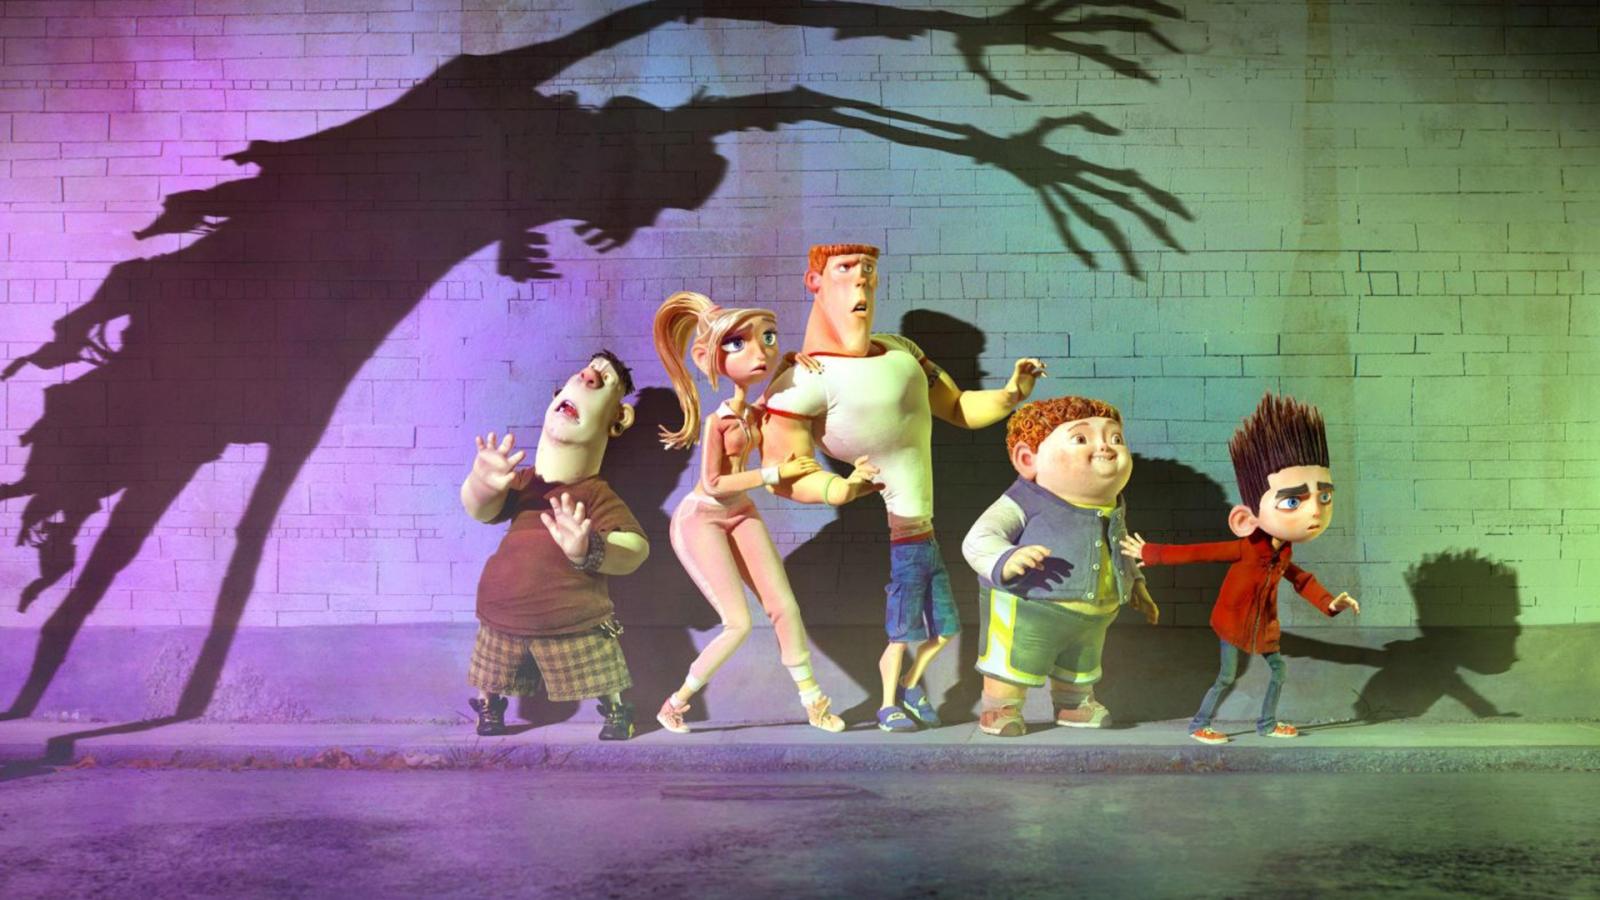 15 Scary Movies to Watch With Kids This Halloween Instead of Trick-or-Treating - image 3